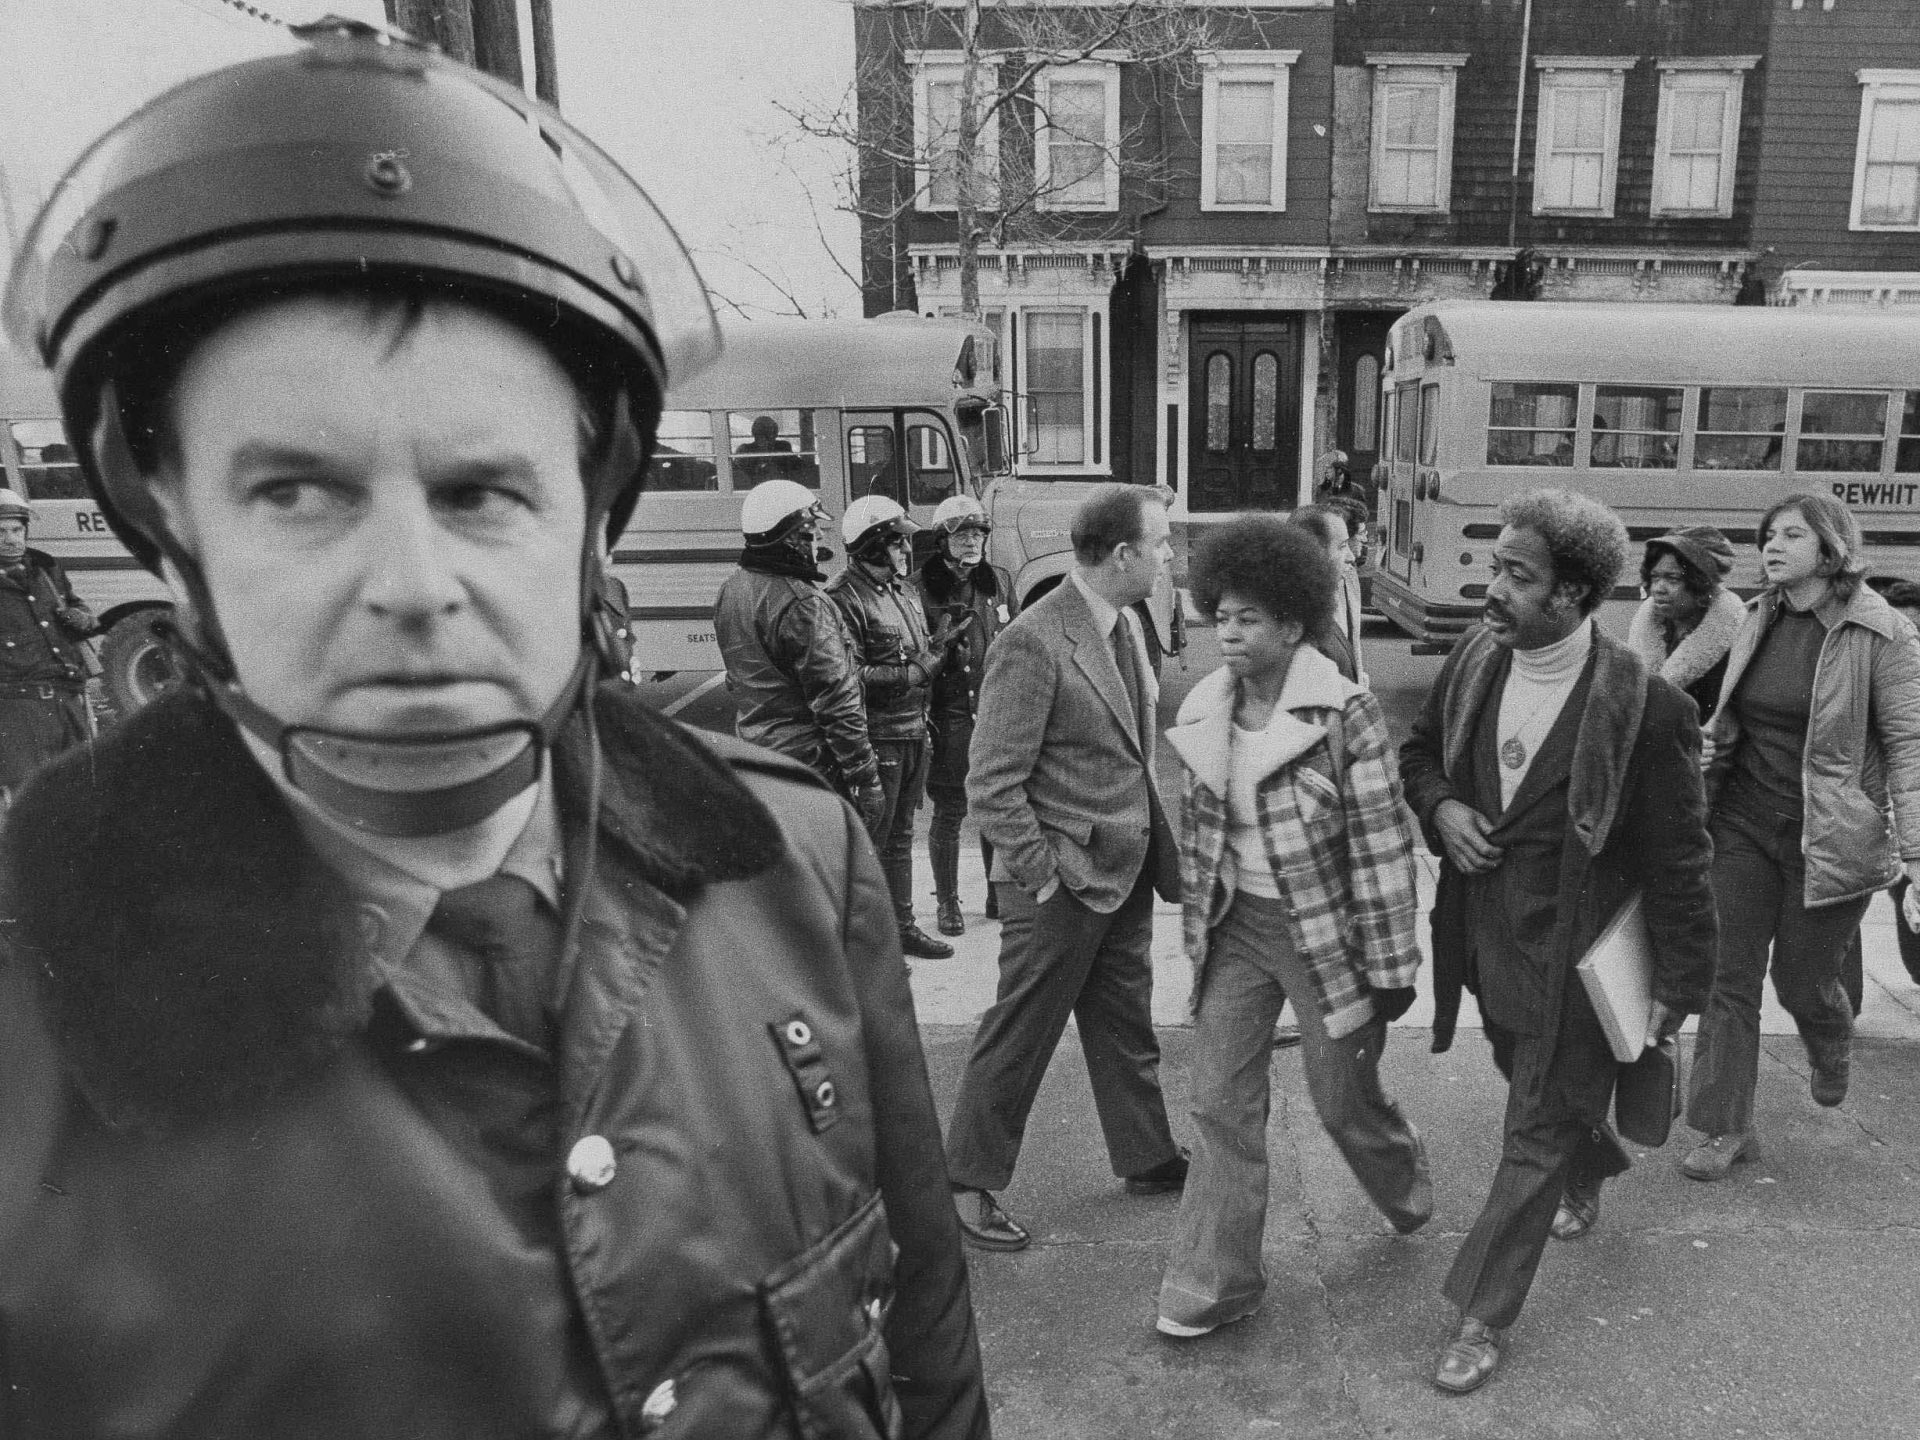 Buses arrive at South Boston High School, Jan. 8, 1975 as classes resume at the racially troubled institution. Police were on hand to provide protection as black students arrived.